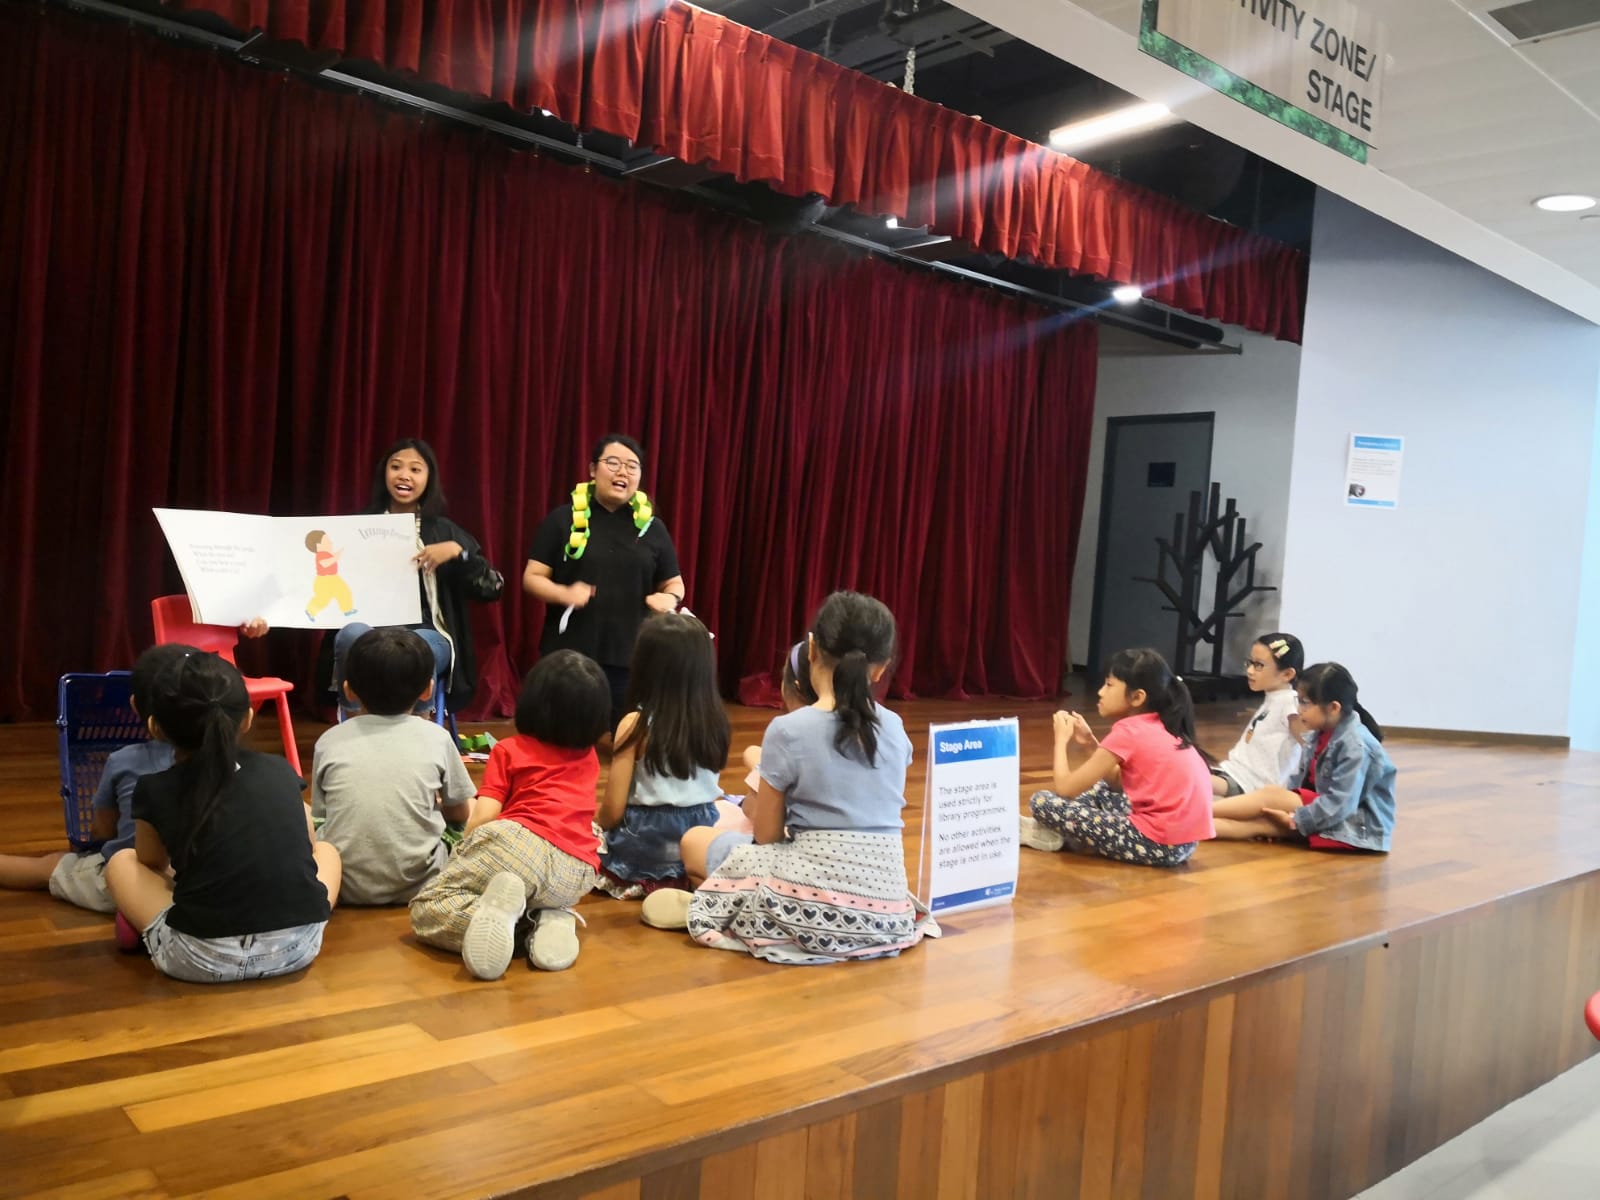 NLB Storytelling with Puppets